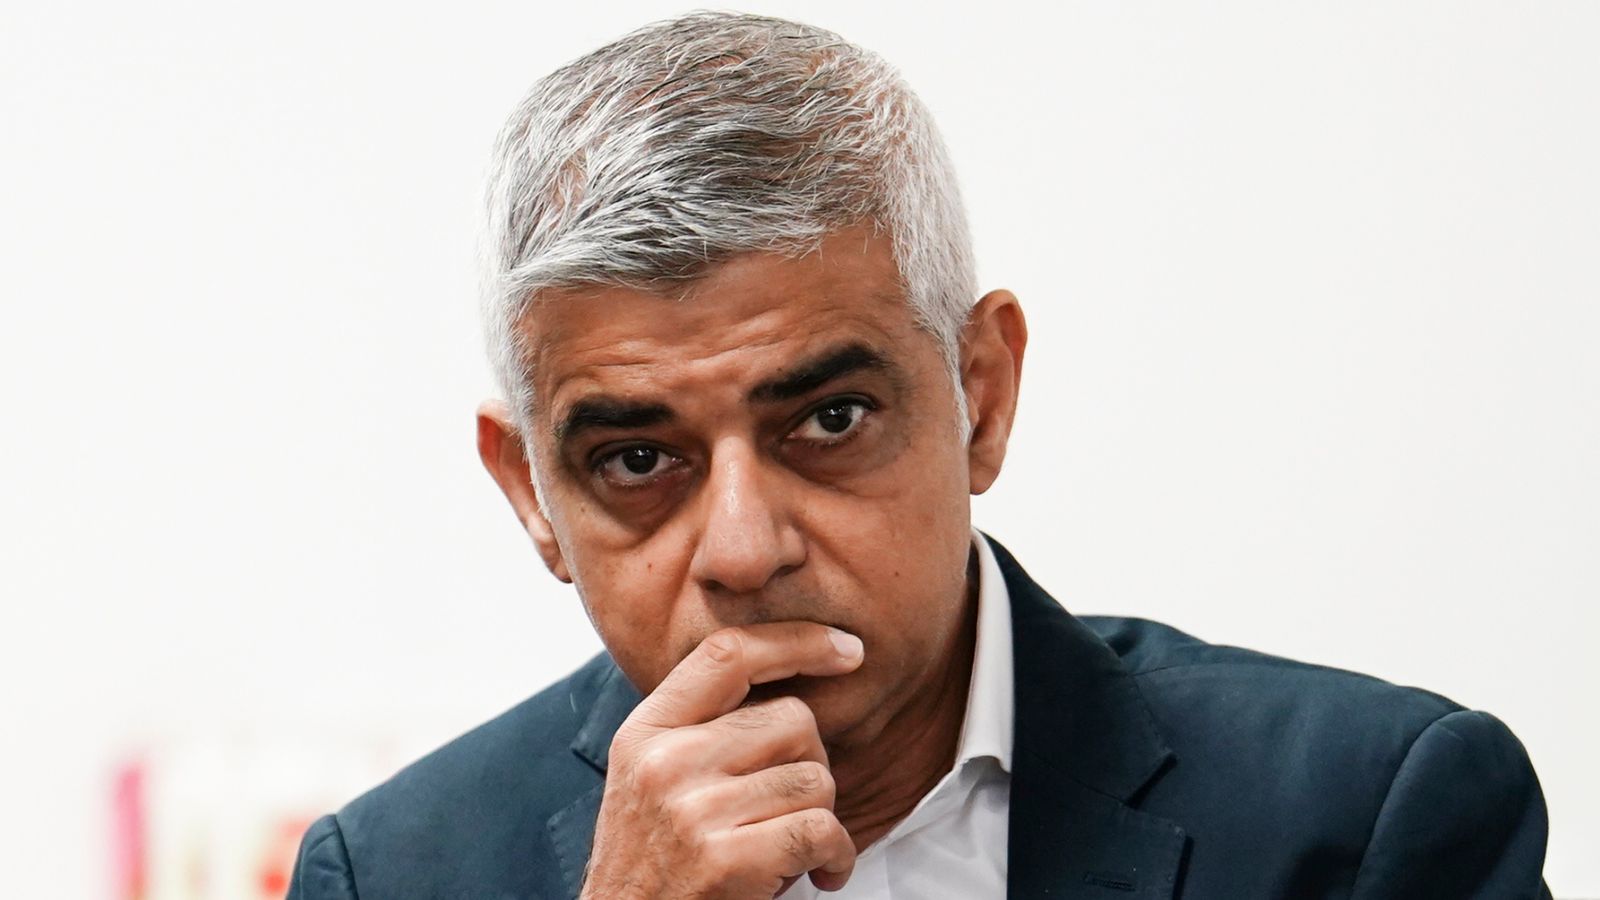 Deepfake audio of Sadiq Khan is not a criminal offence, Met Police says